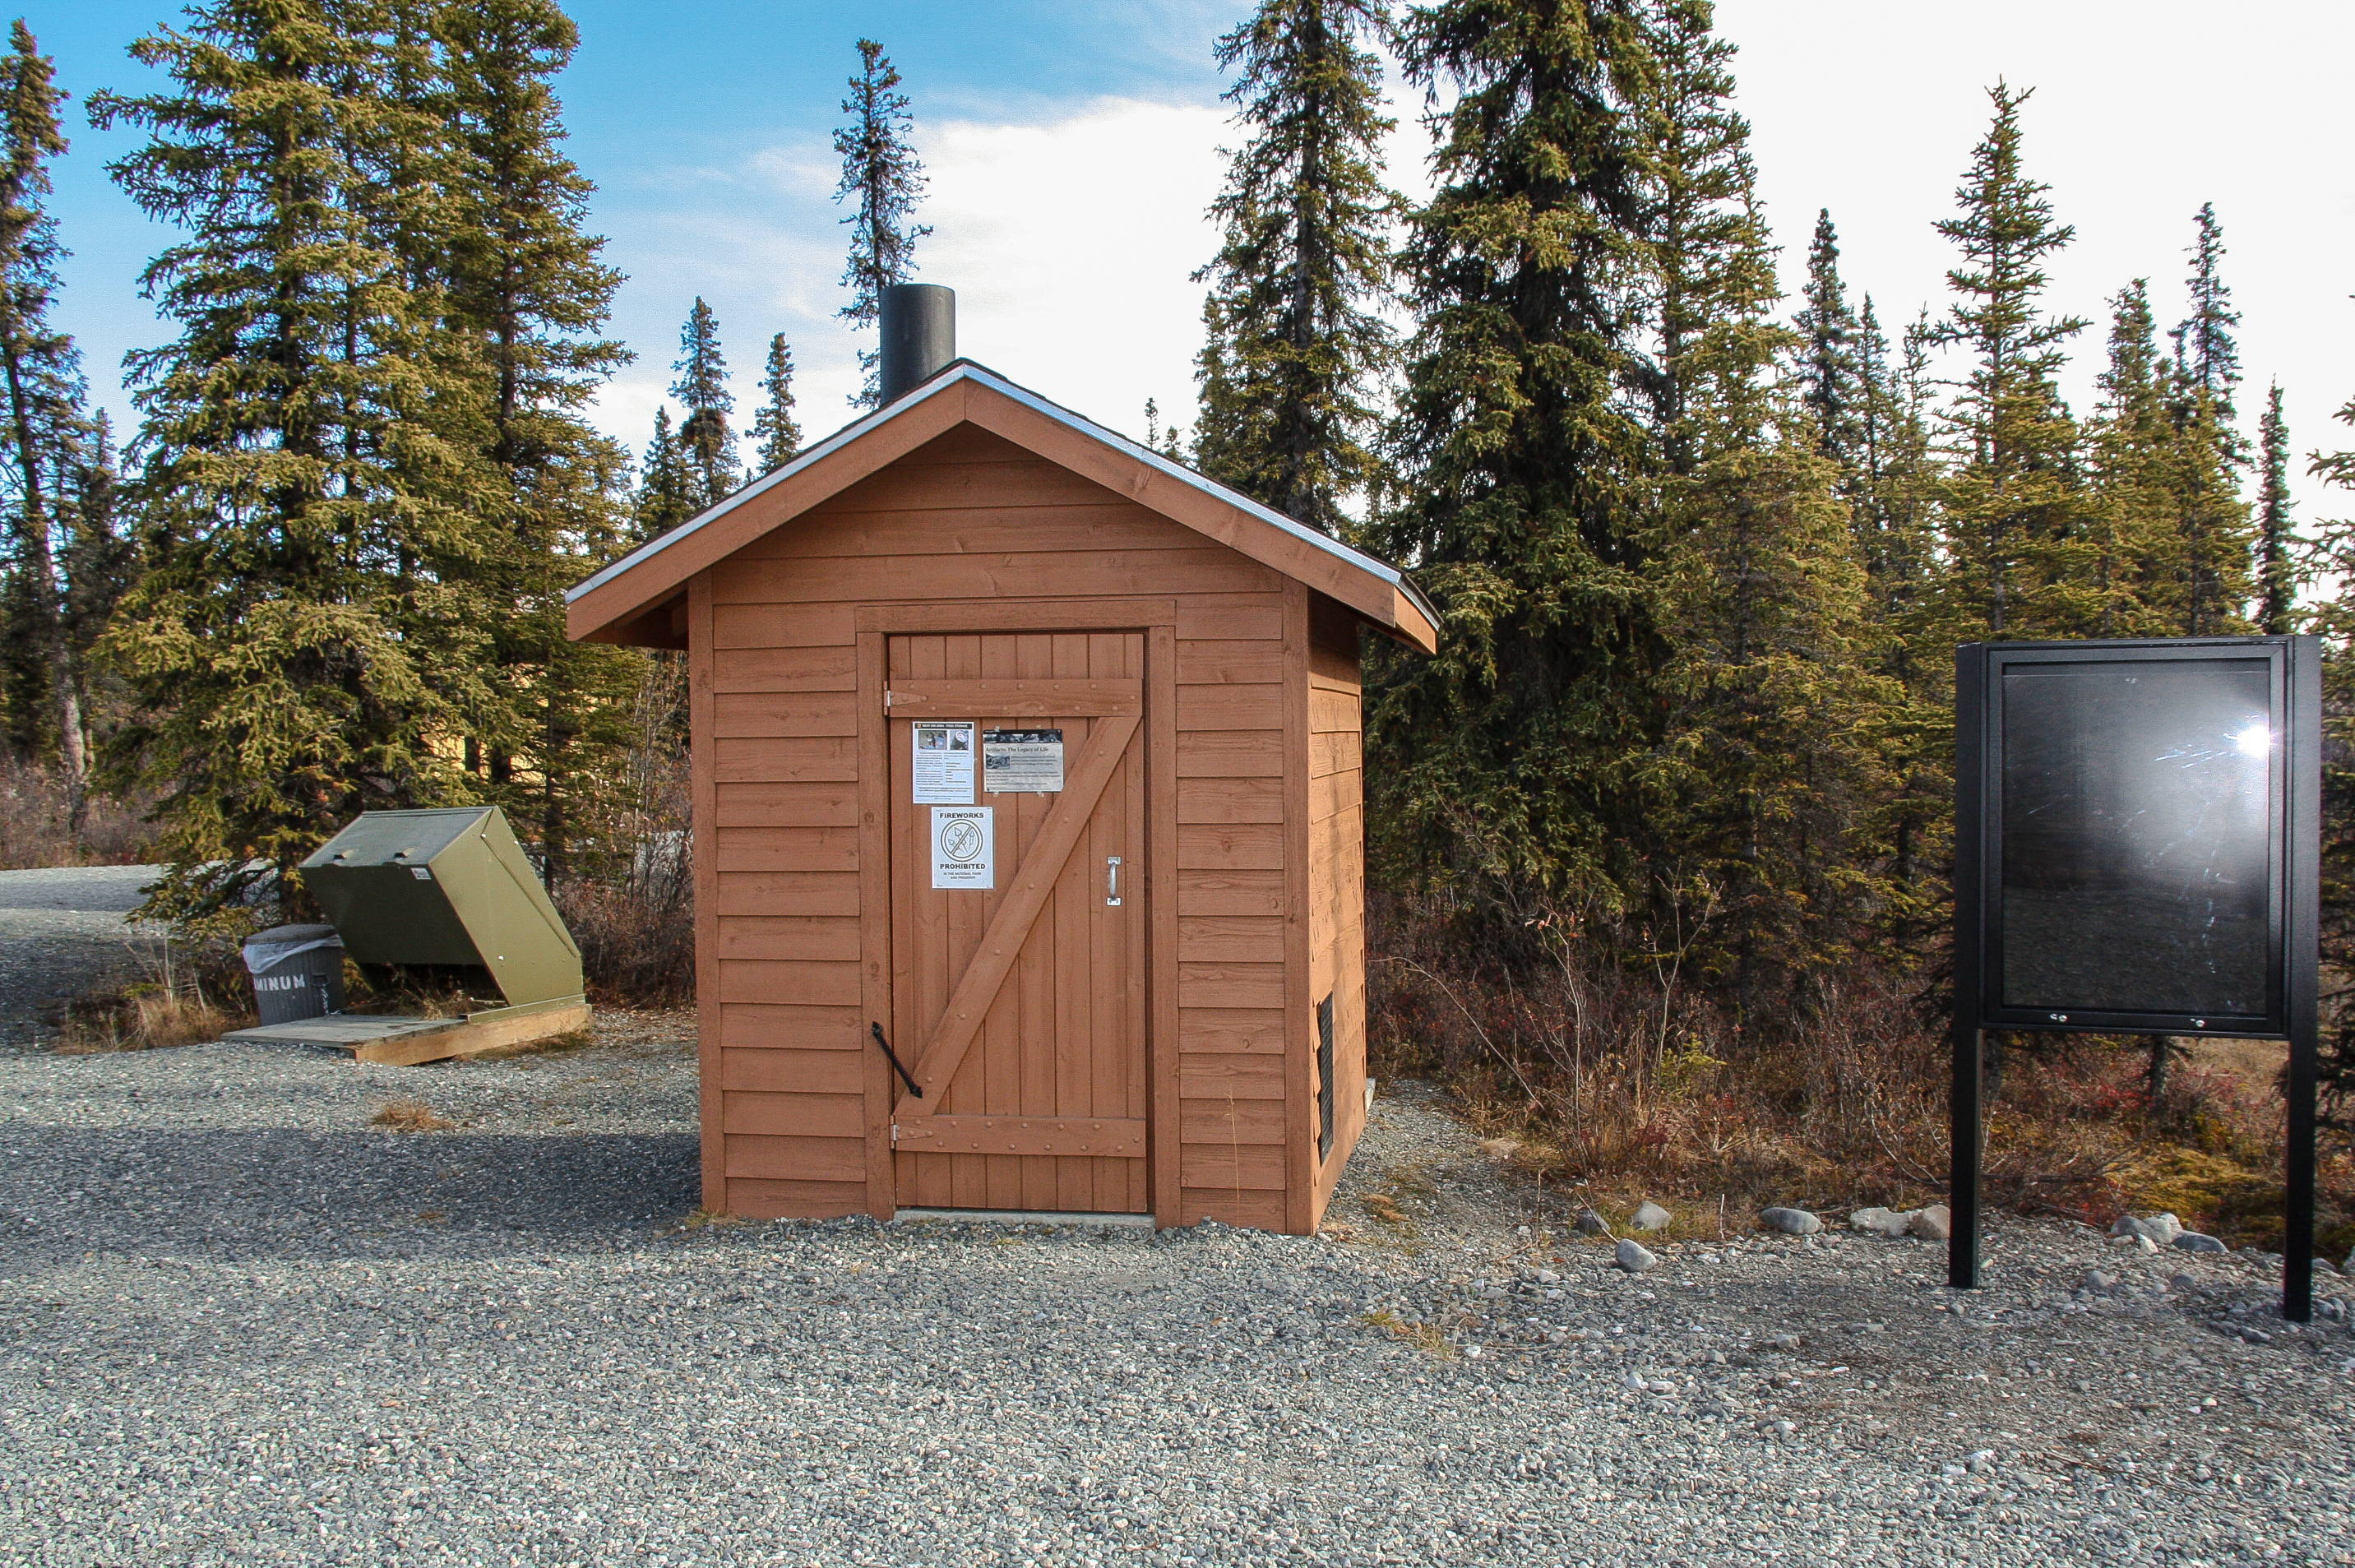 Outside view of vault toilet next to bear-proof trash canisters with forest in the background